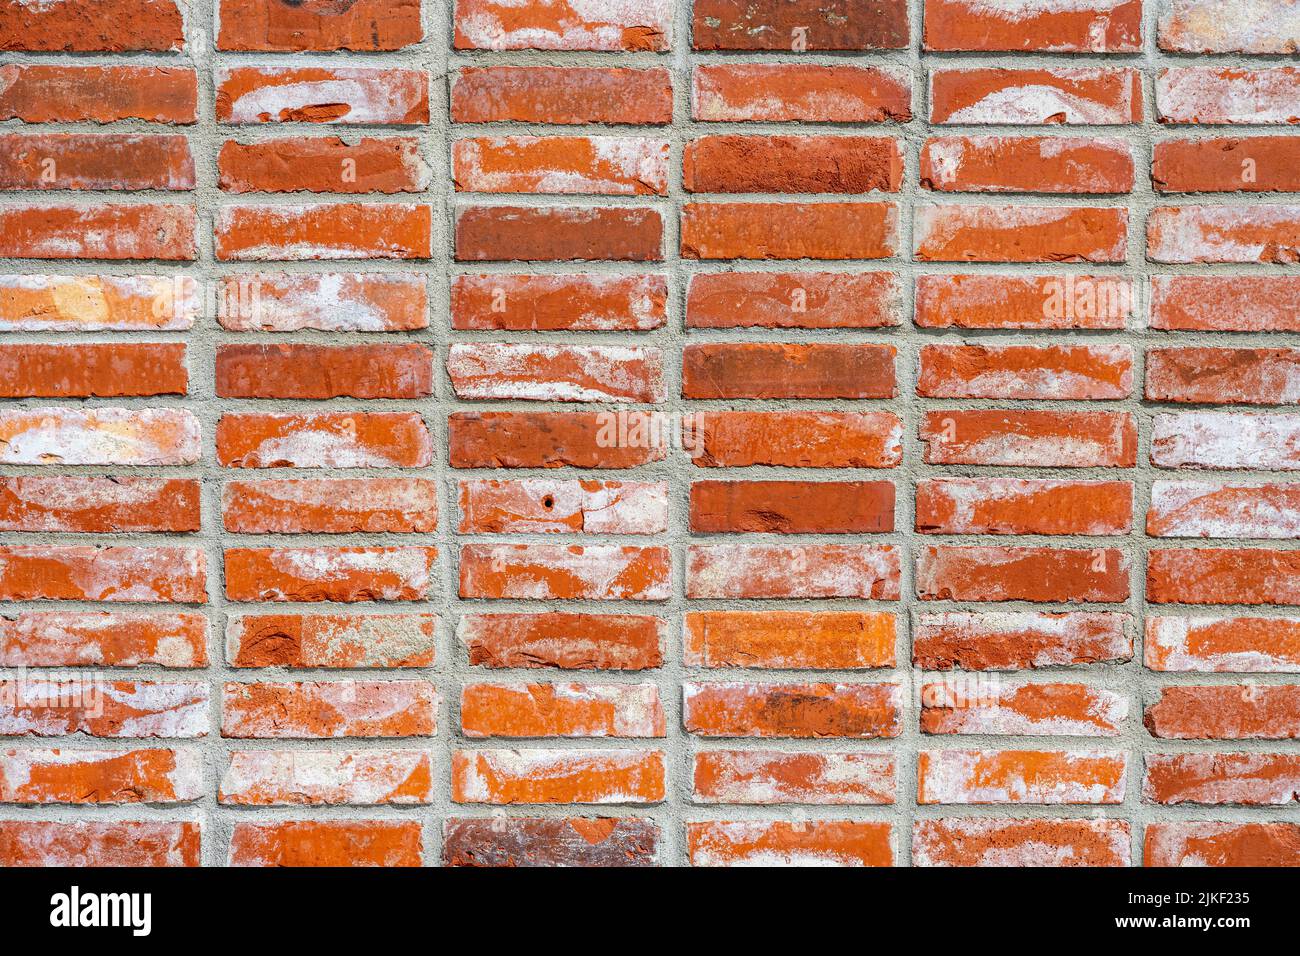 Background from a wall made of red clinker bricks Stock Photo